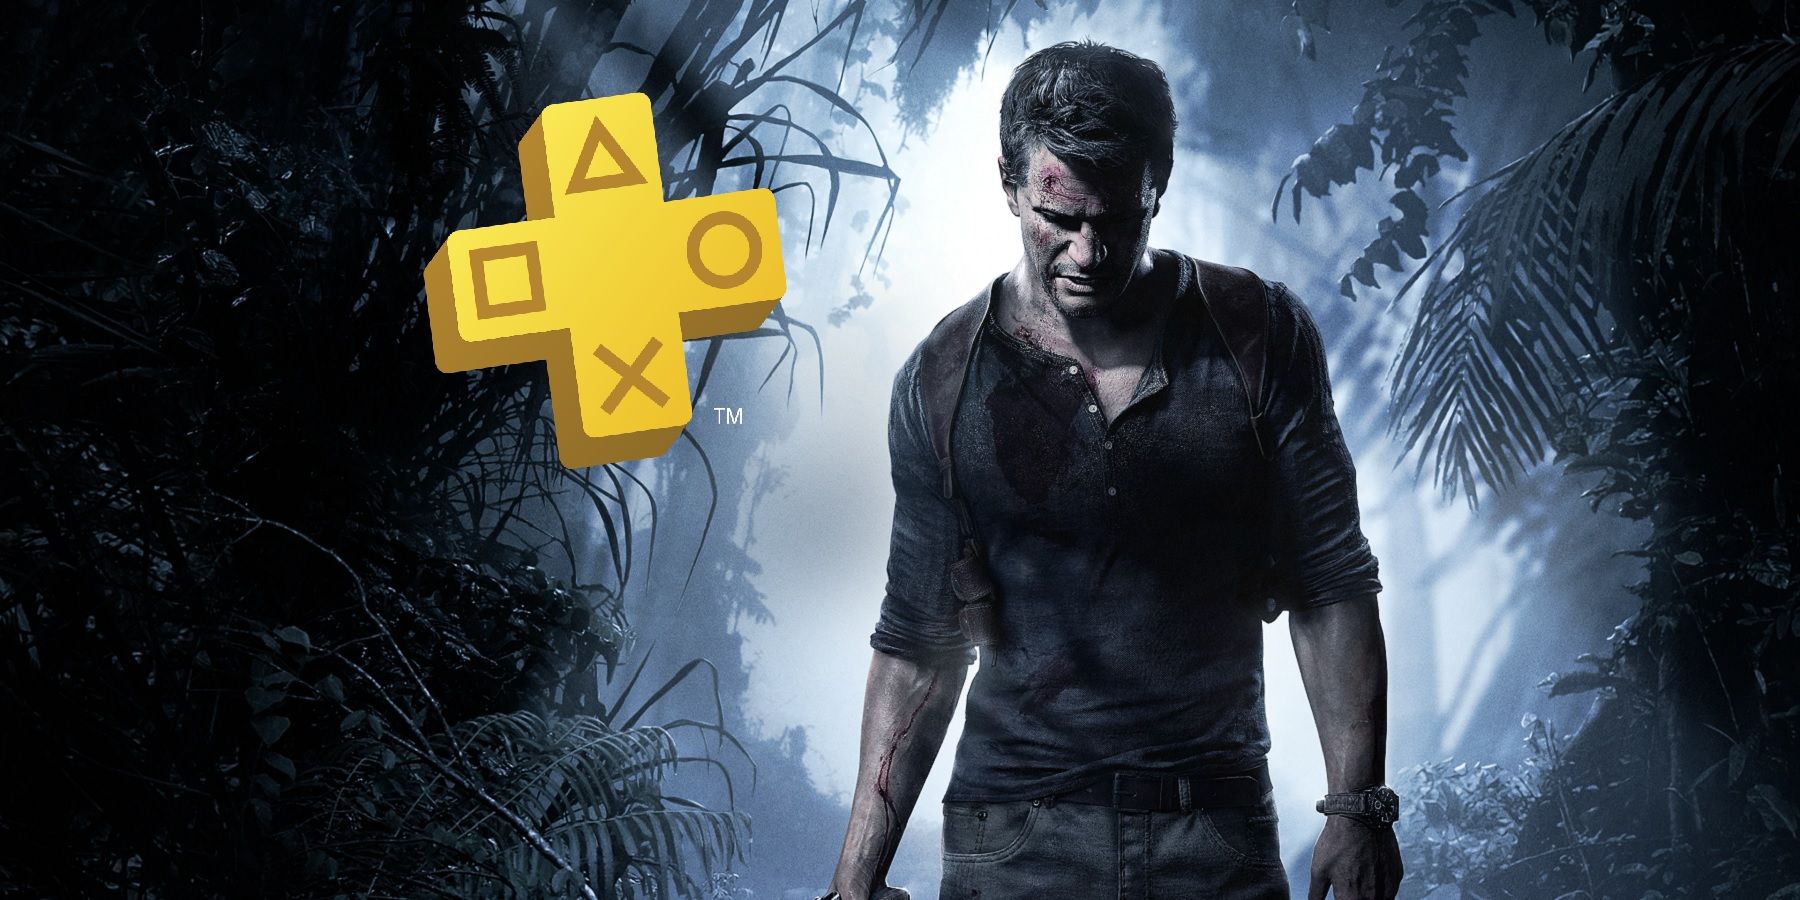 uncharted 4 box art with ps plus logo